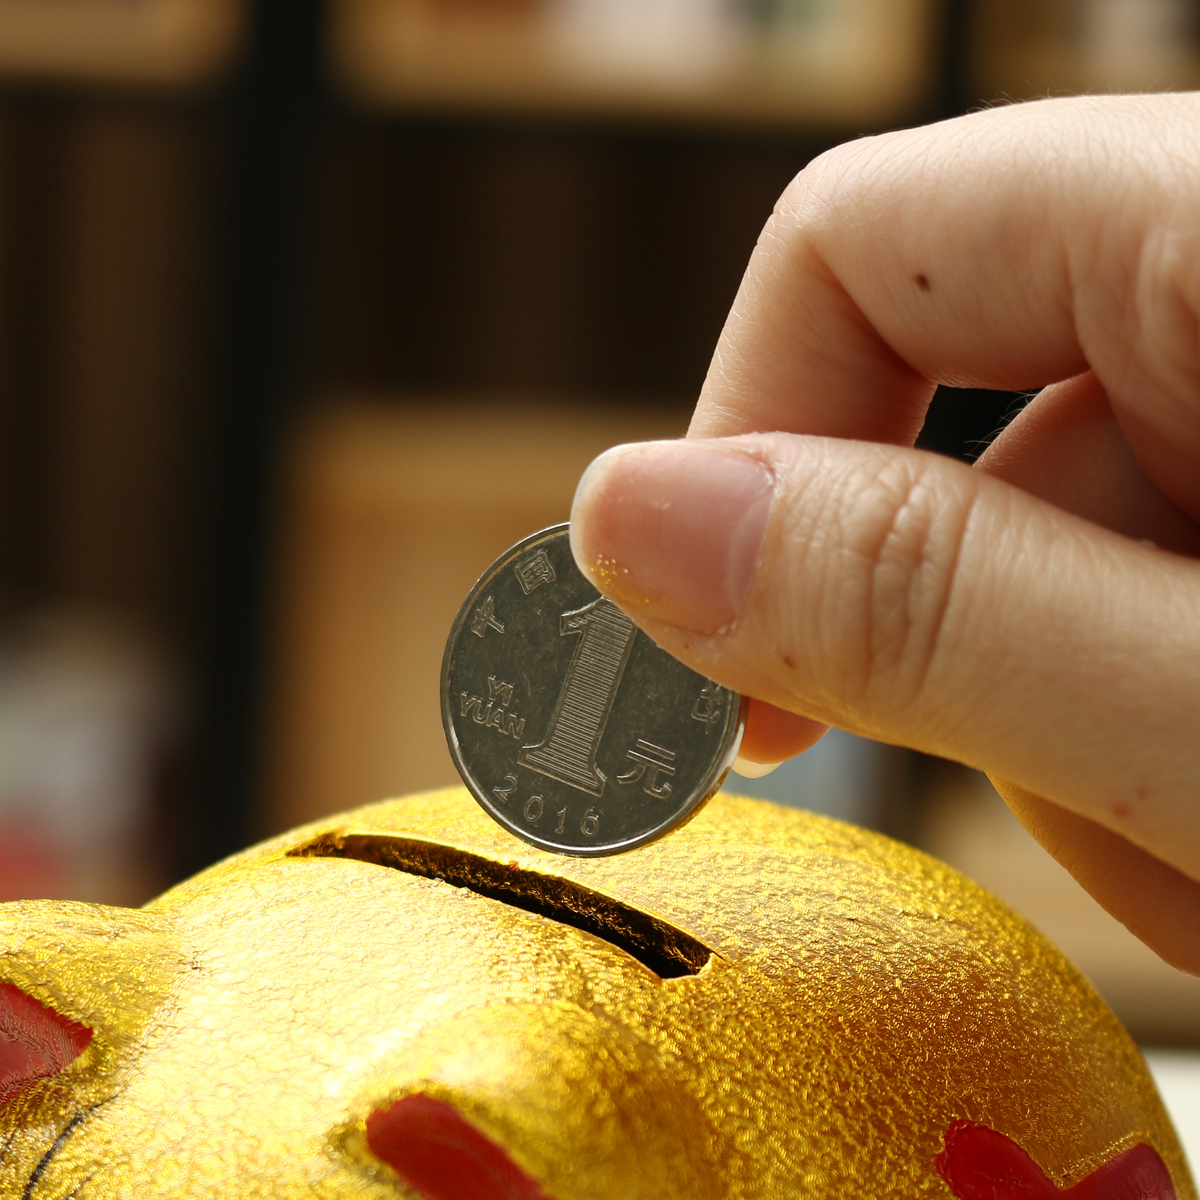 5-Gold-Ceramic-Piggy-Bank-Mini-Cute-Pig-Children-Coin-Collection-Gift-Decorations-1555224-8